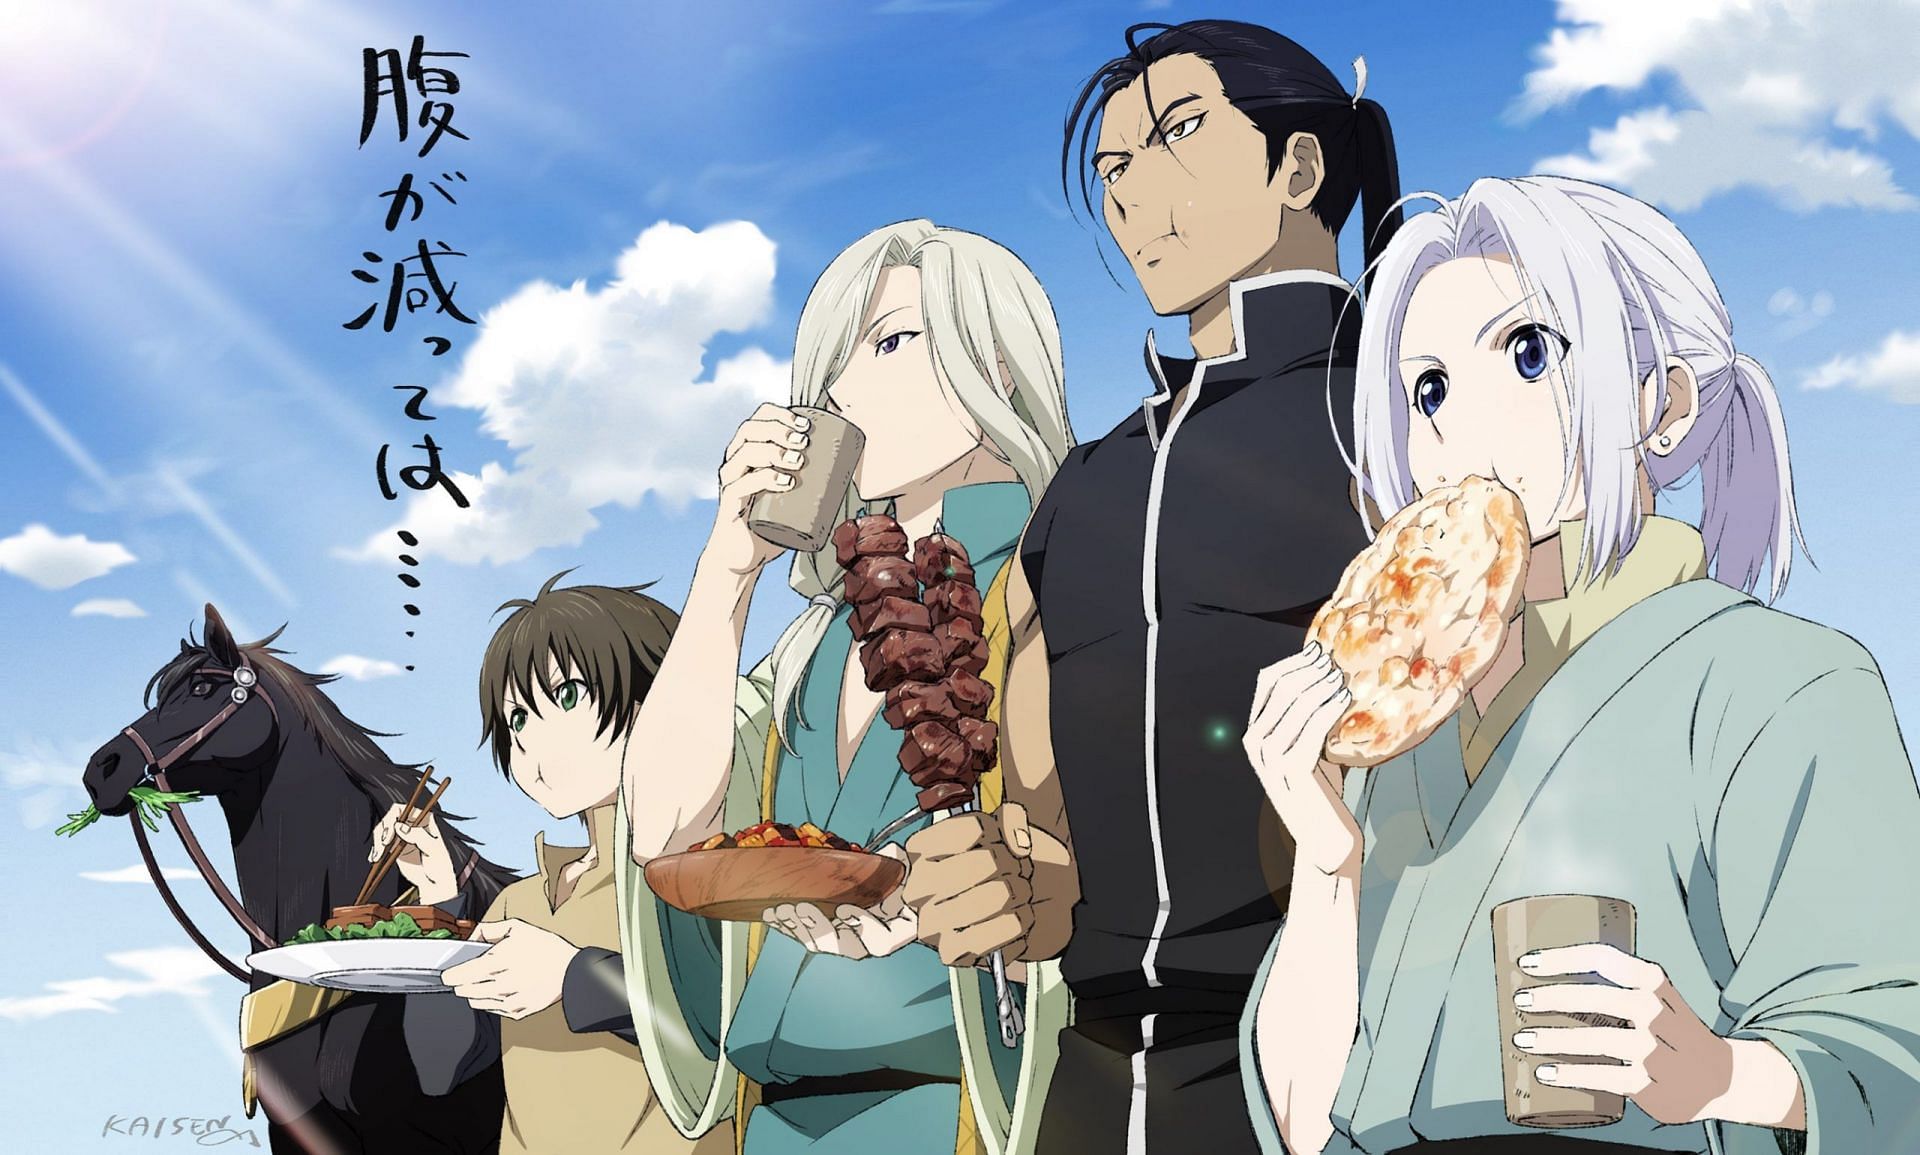 All key characters of the anime The Heroic Legend of Arslan (Image via LIDENFILMS)